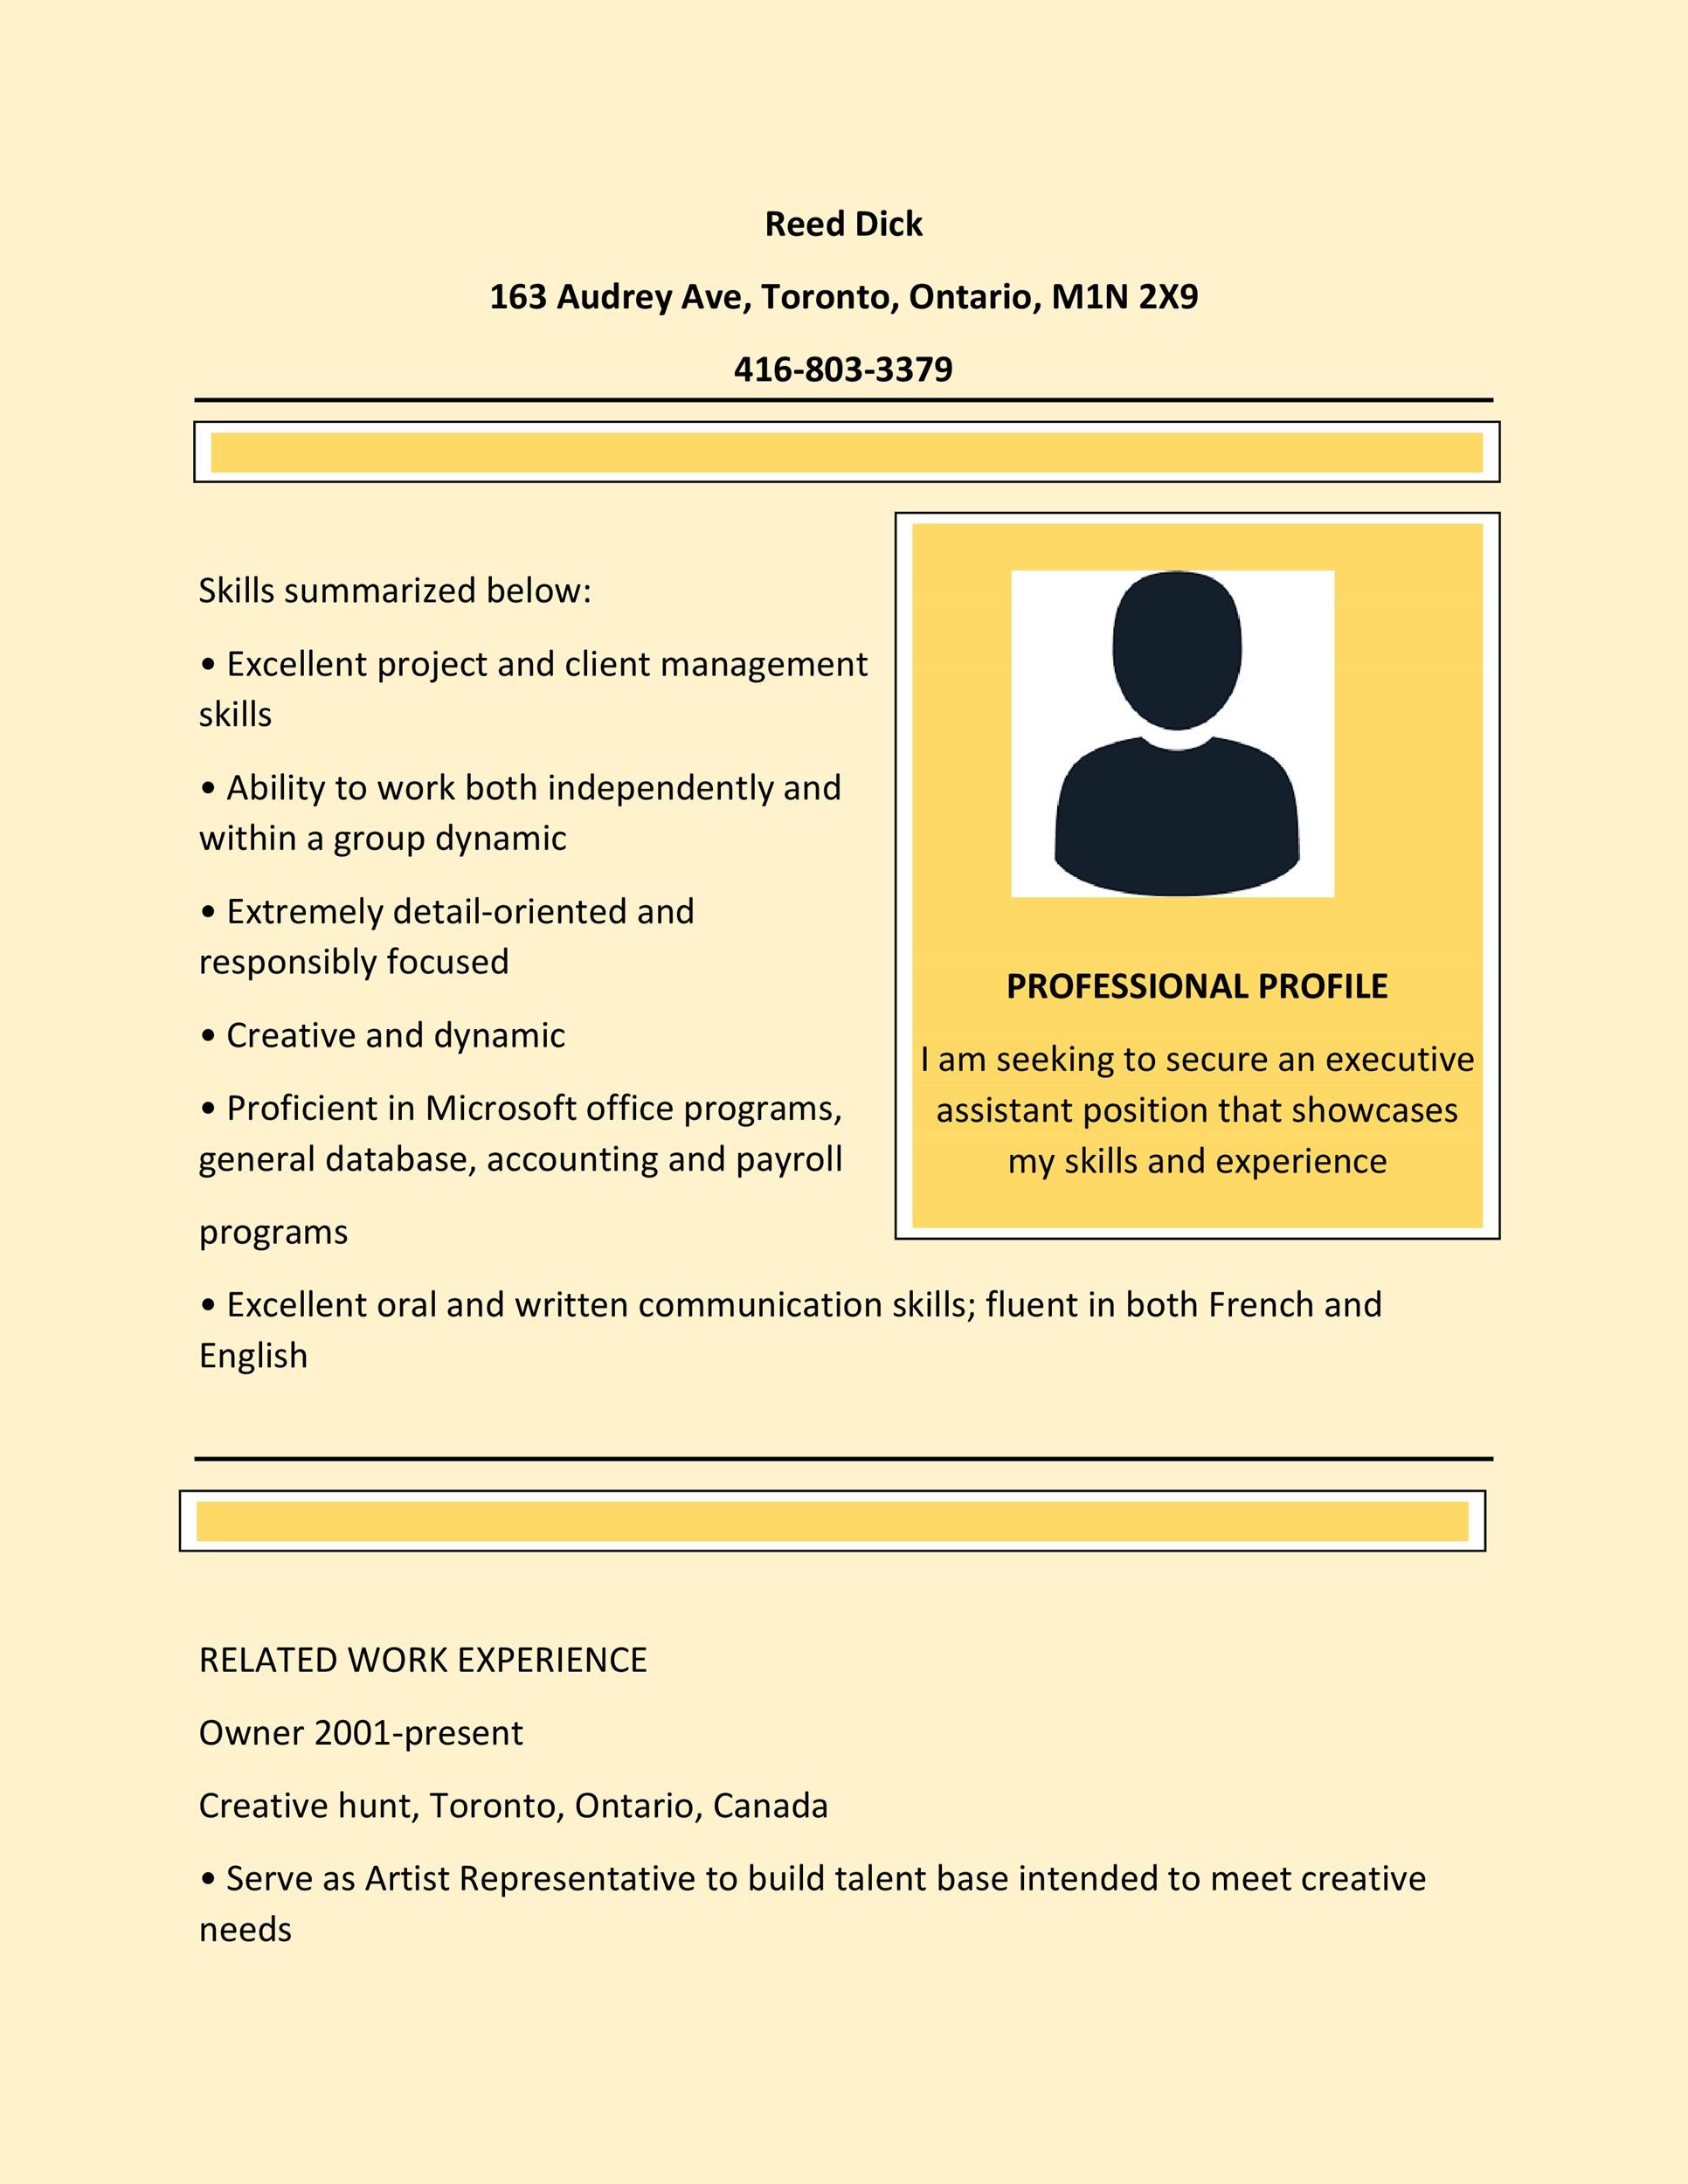 20 Free Administrative Assistant Resume Samples Template Lab